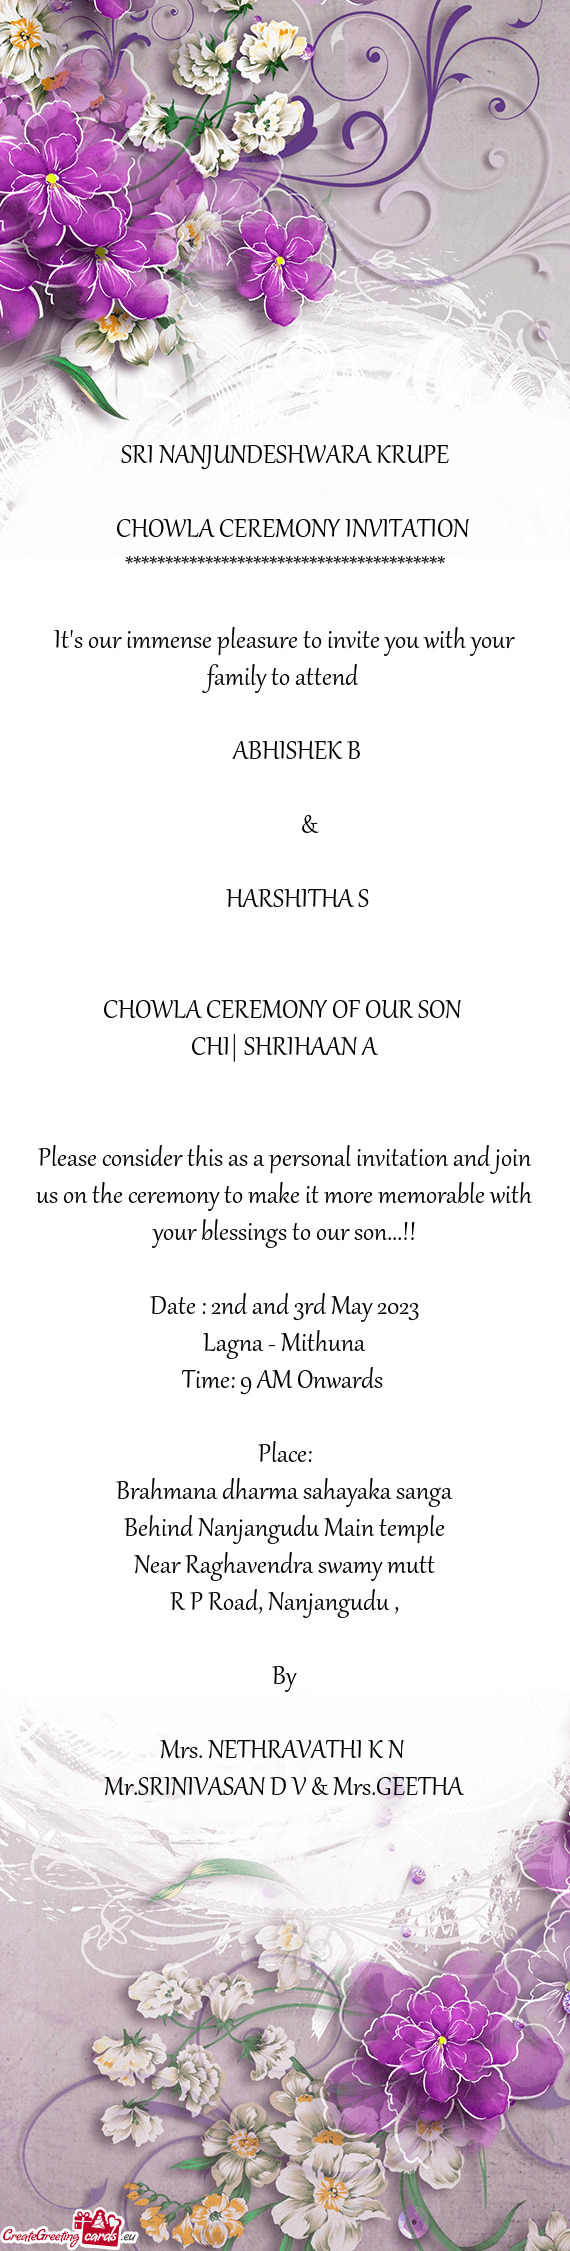 Please consider this as a personal invitation and join us on the ceremony to make it more memorable